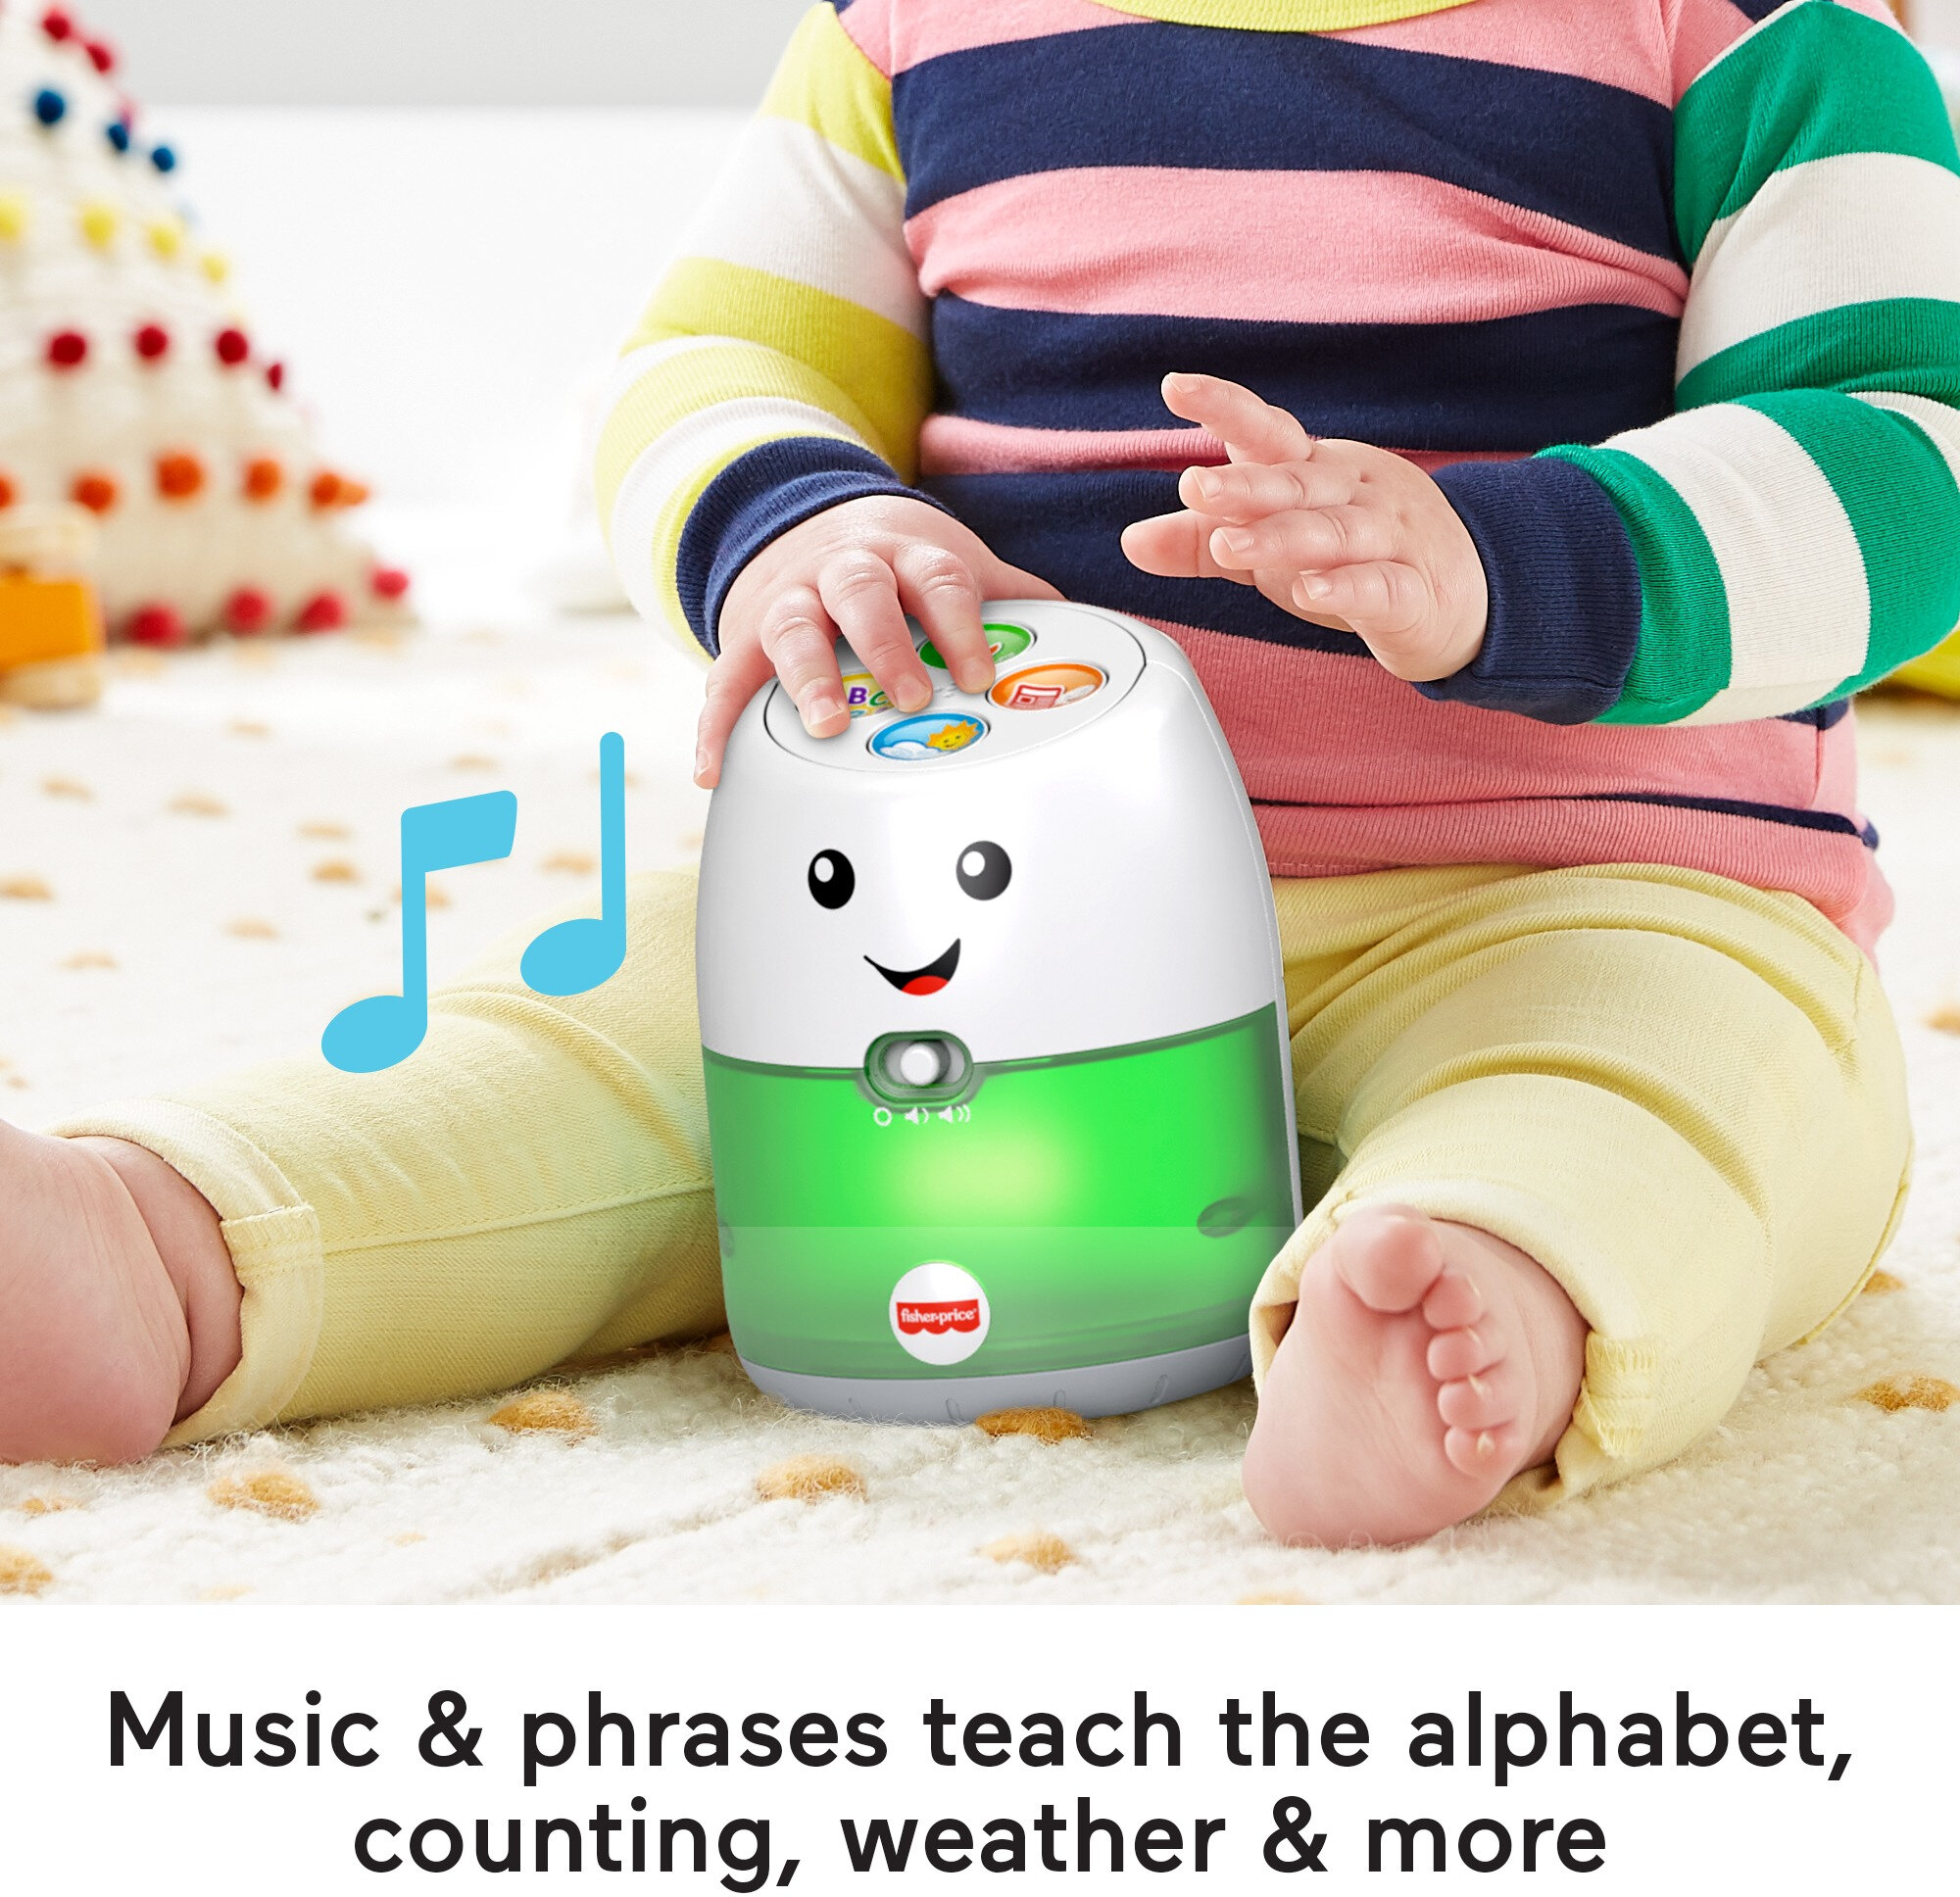 Fisher-Price Laugh & Learn Babble & Wobble Hub Interactive Baby Toy - image 4 of 7